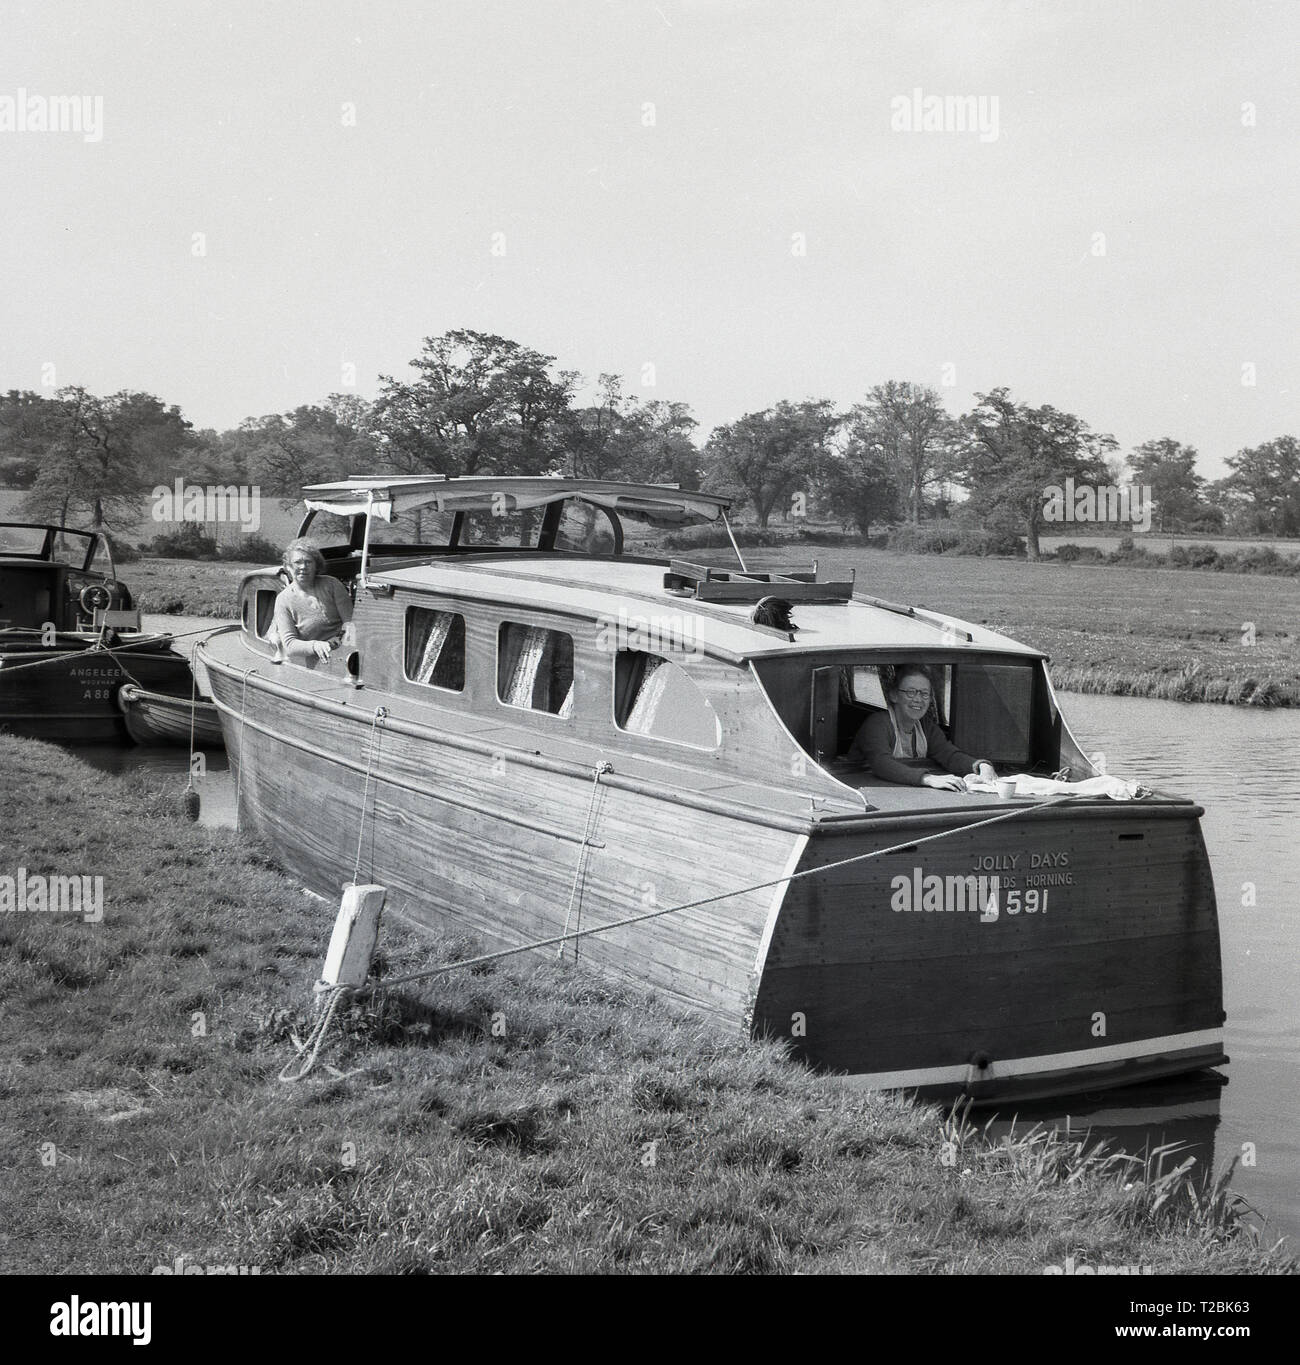 1950s, historical, two elderly ladies on their wooden built motor launch or cabin cruiser, 'Jolly Days', moored at the riverbank on the river Thames, near Oxford, England, UK. Stock Photo